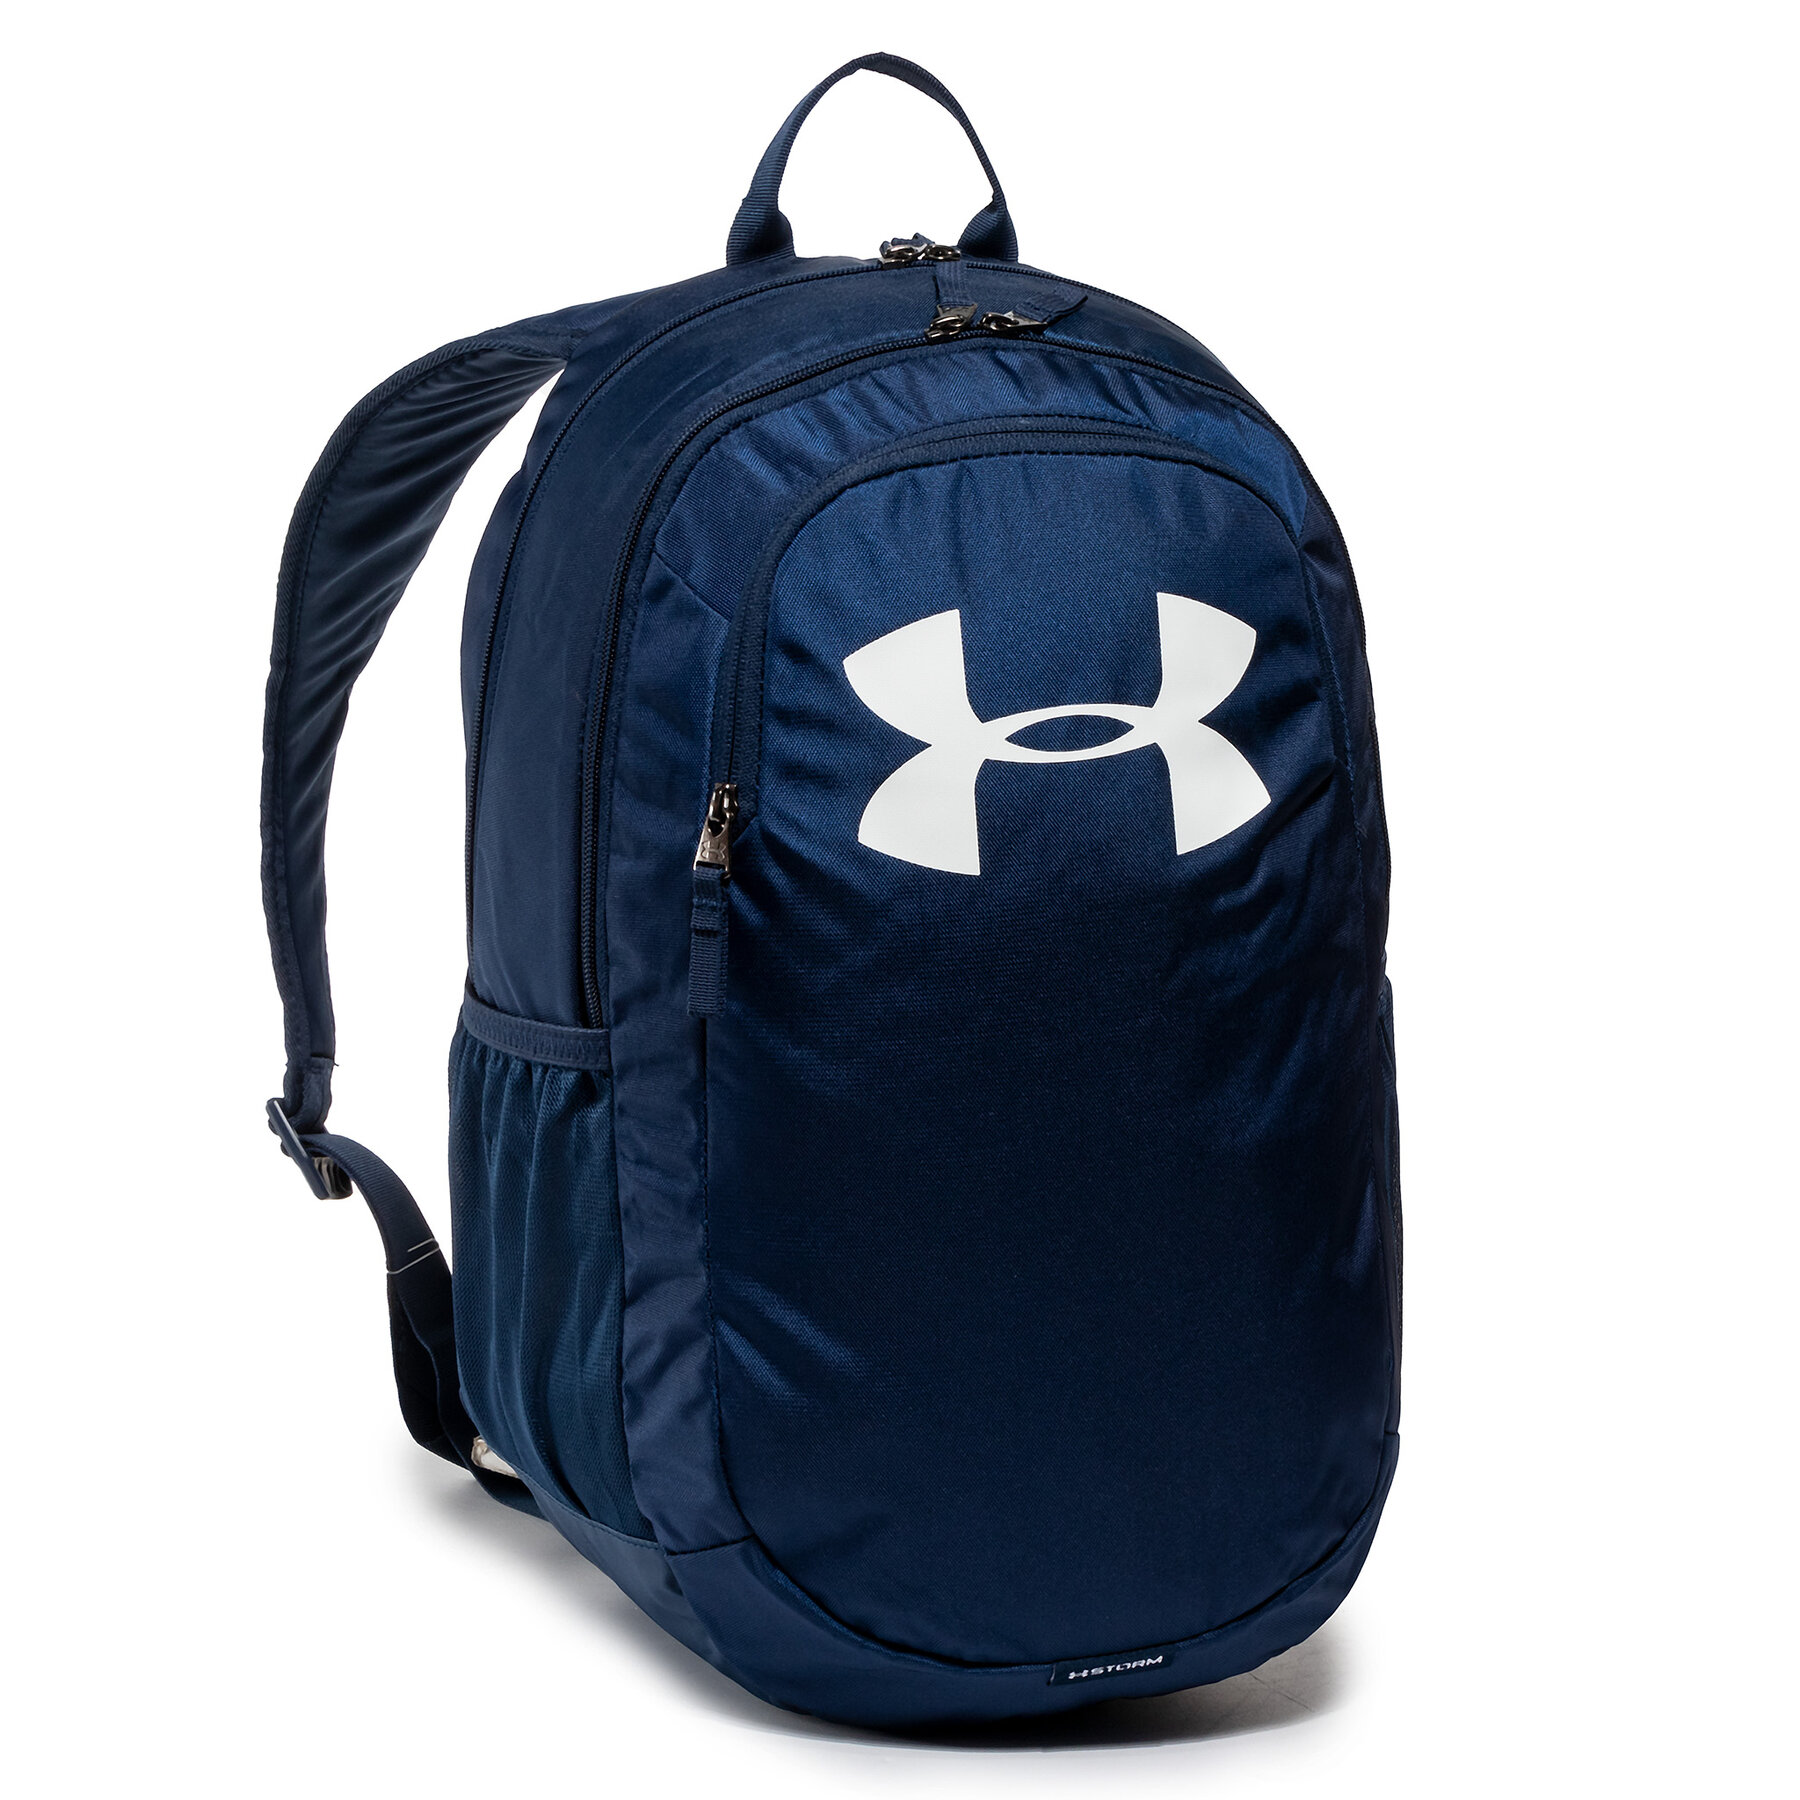 Under Armour Youth UA Scrimmage 2.0 Backpack - Mochilas